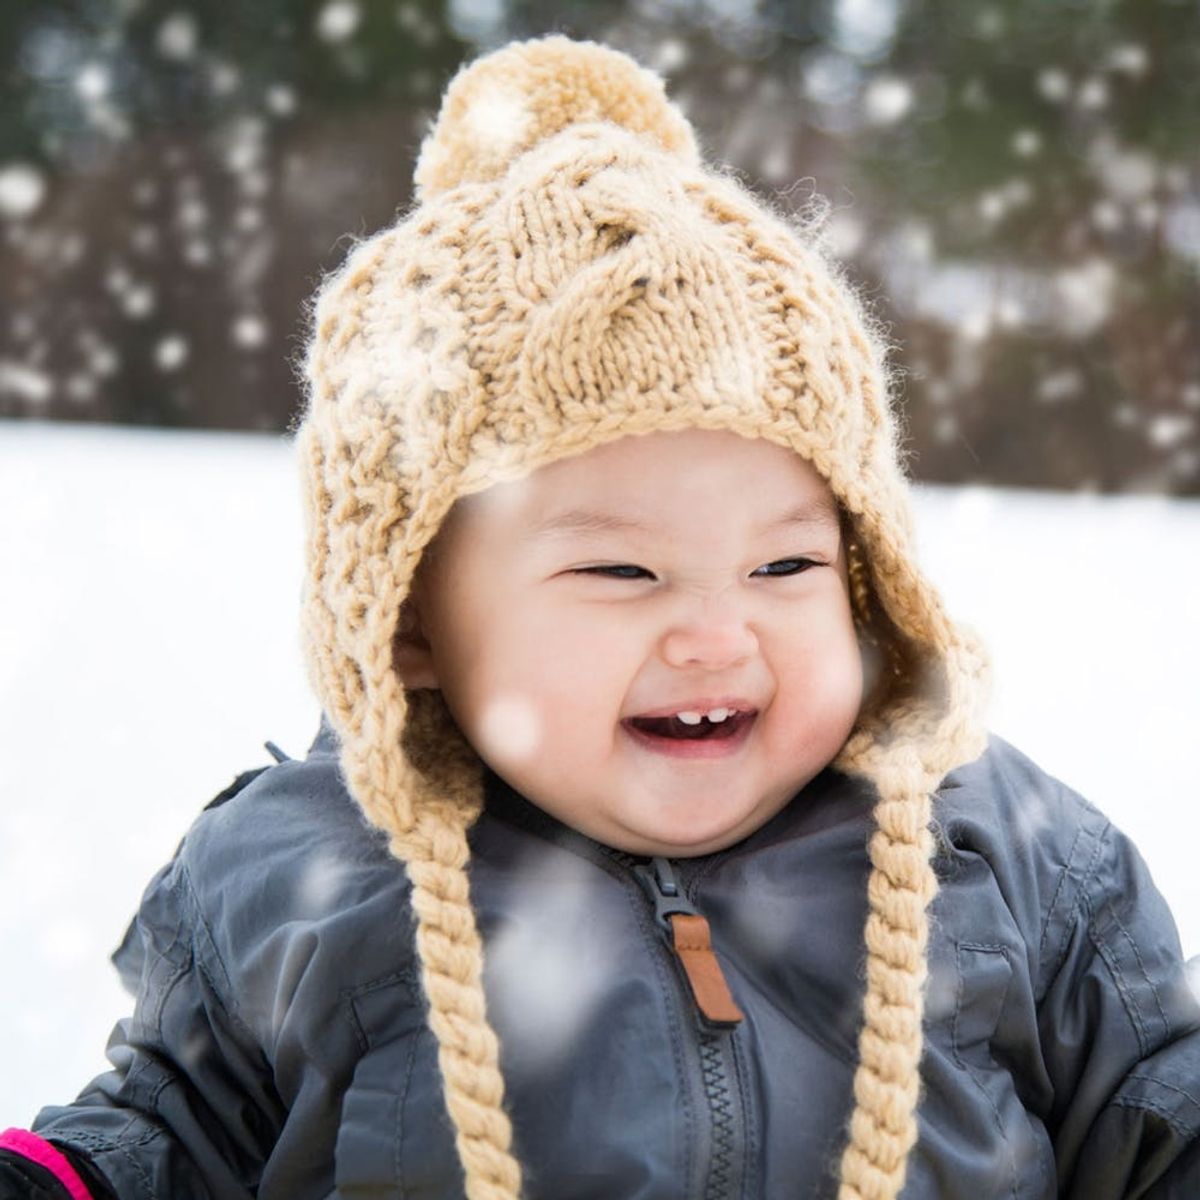 12 Creative Baby Names Inspired by Snow